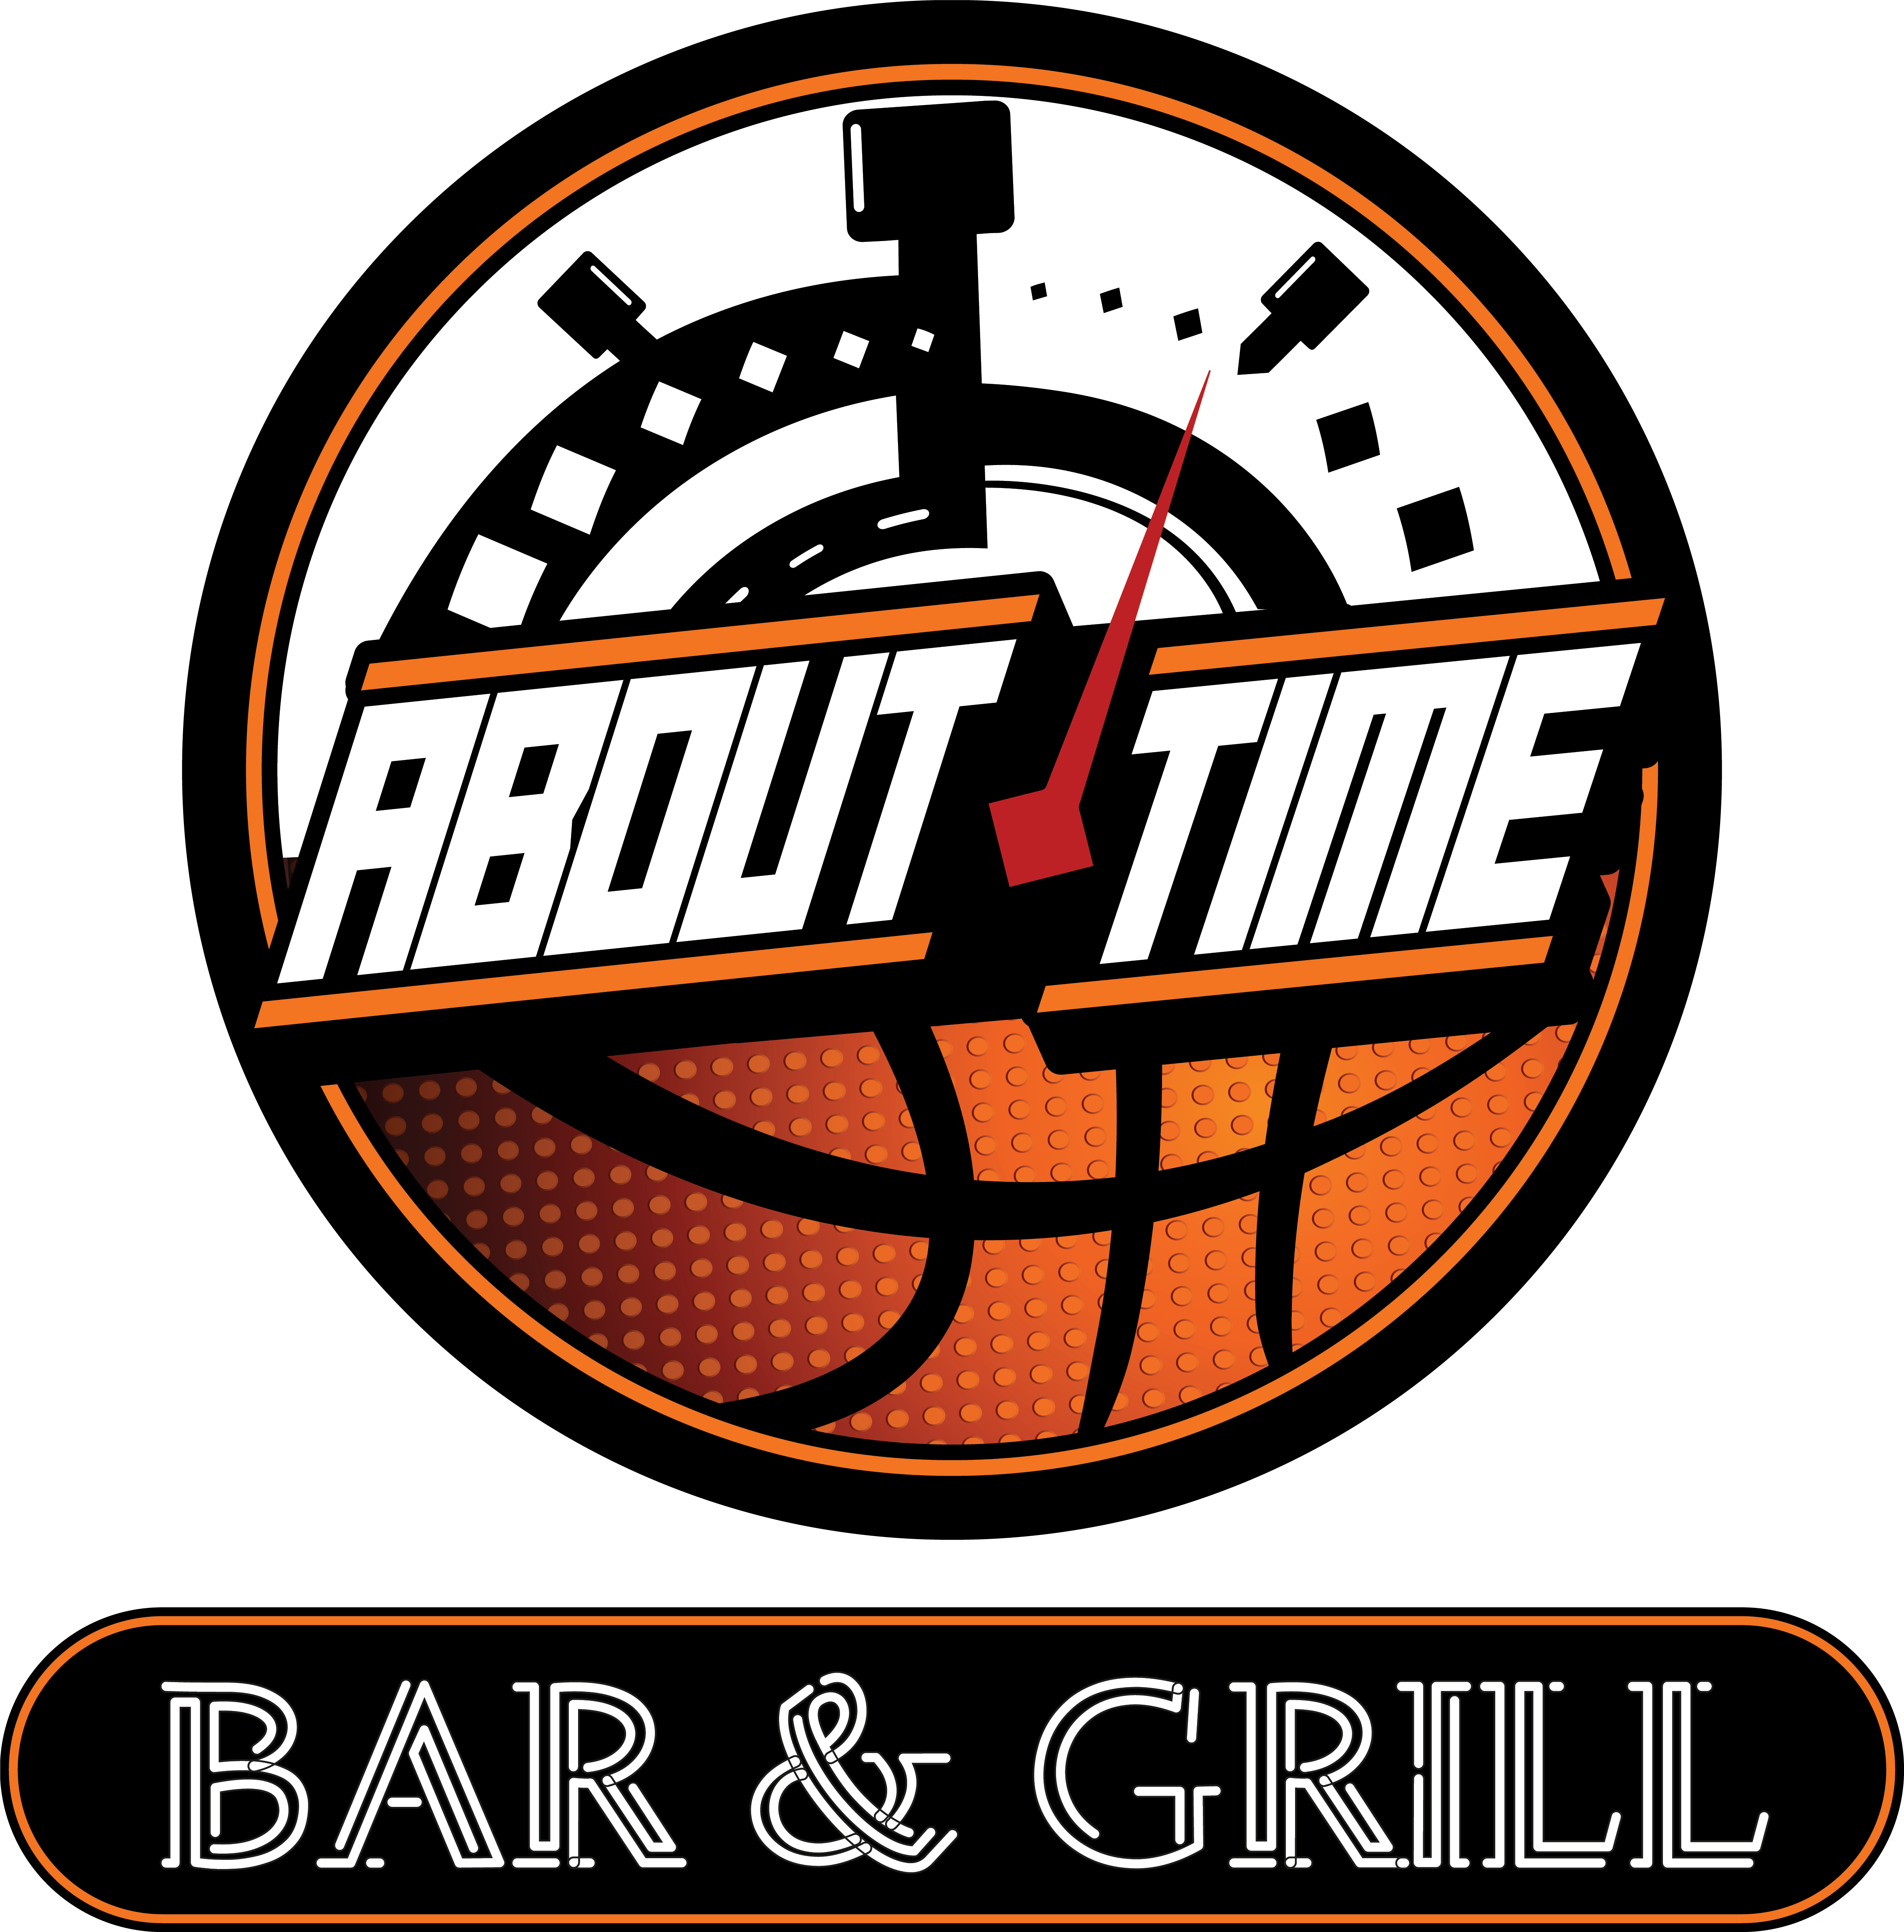 About Time Bar and Grill